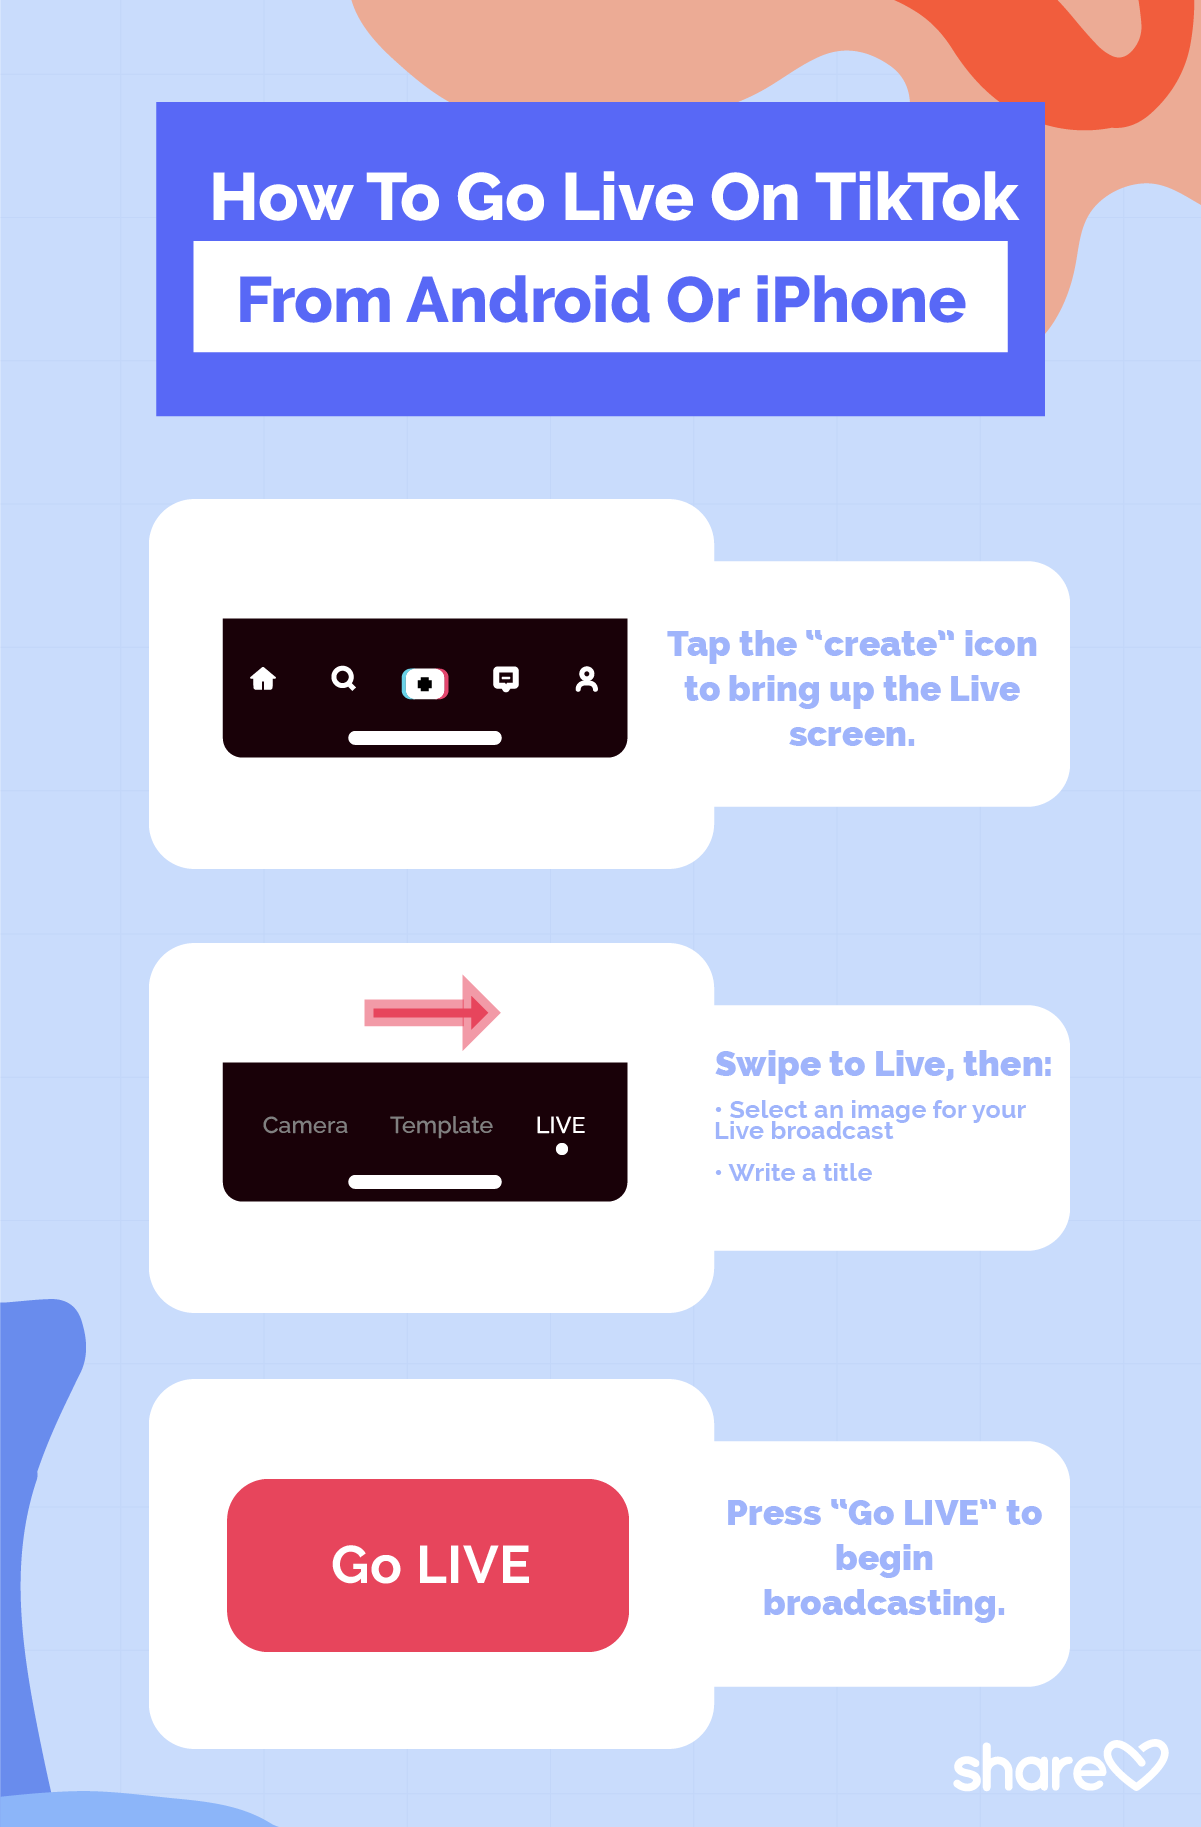 How To Go Live On TikTok From Android Or iPhone